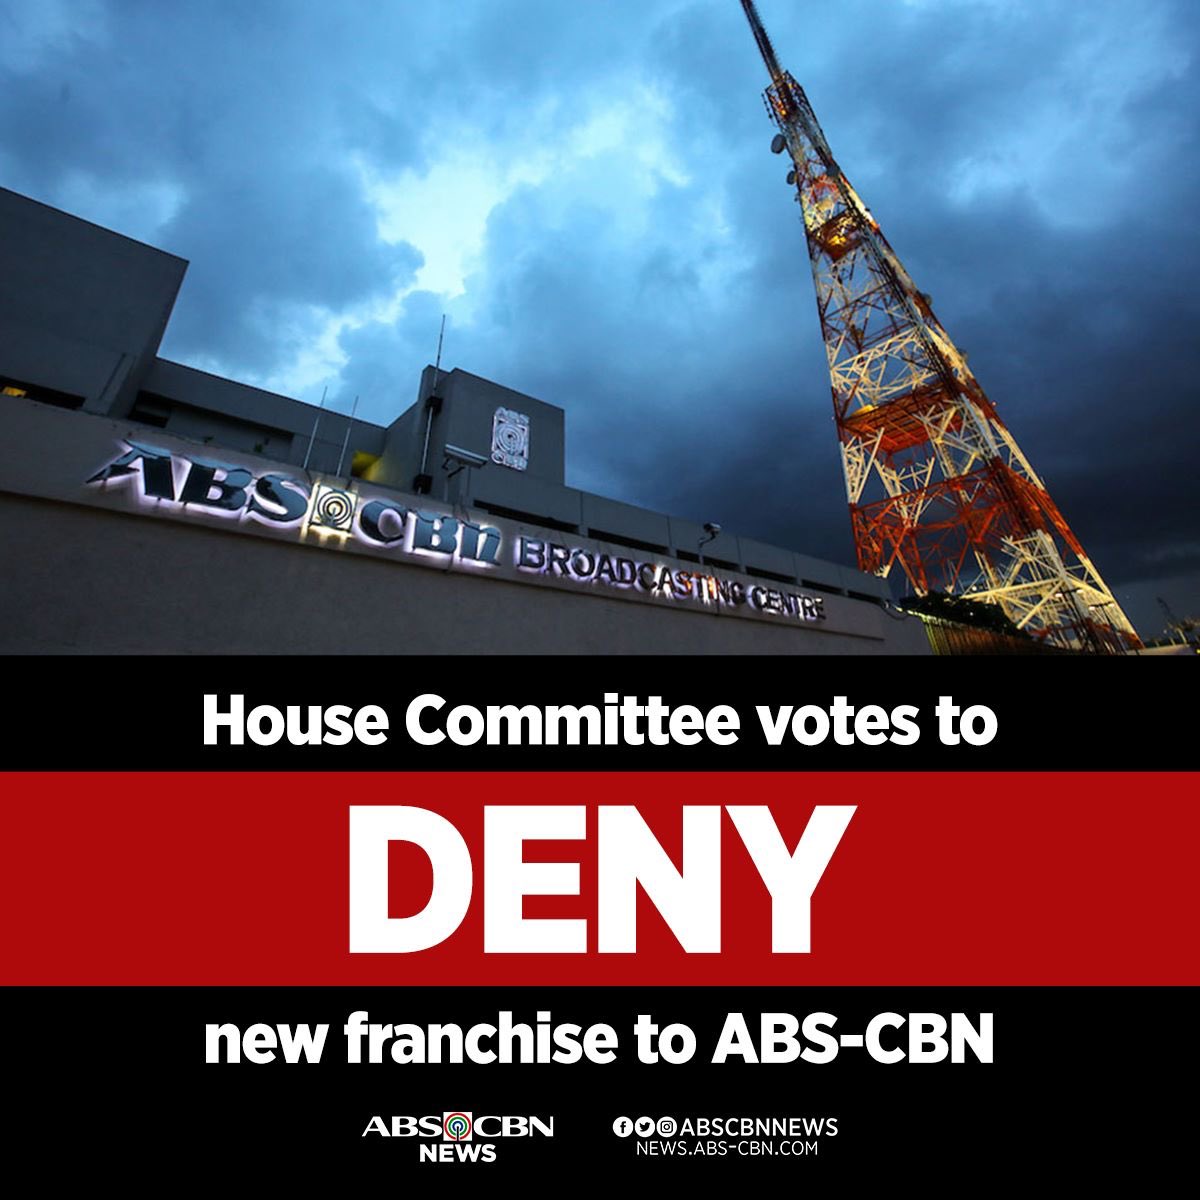 BREAKING: House franchise committee votes to deny new franchise to ABS-CBN #ABSCBNfranchise